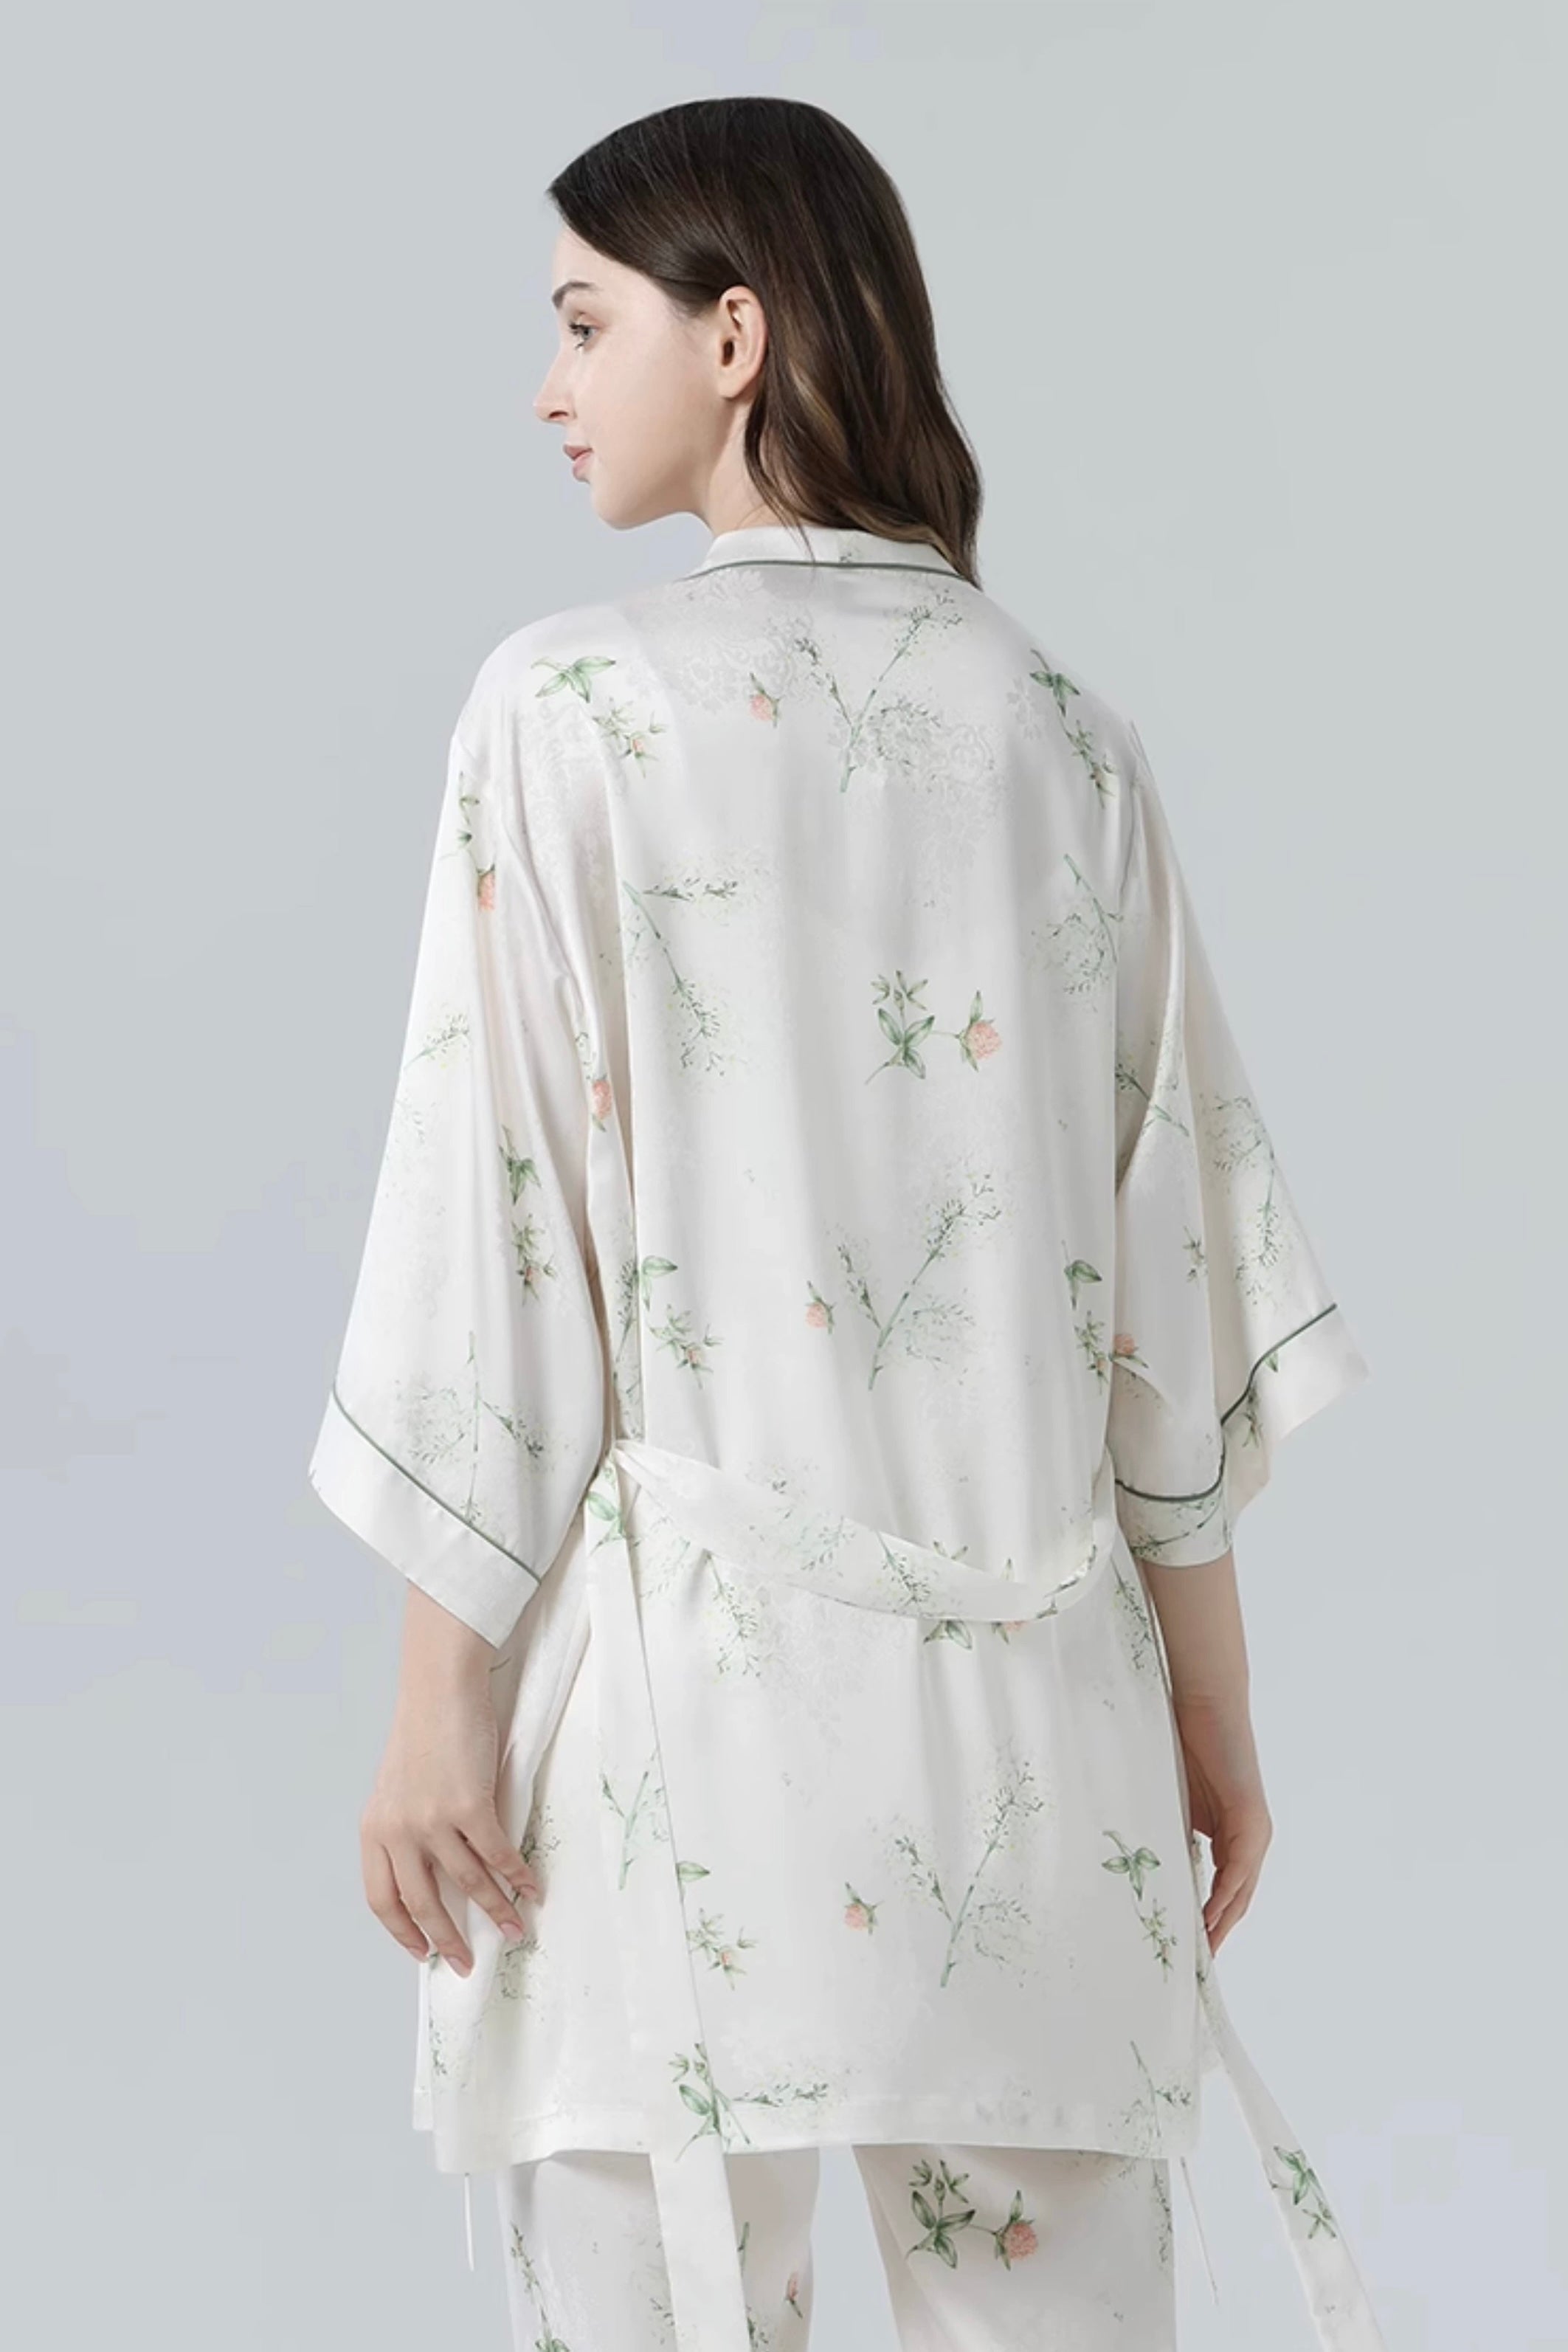 Evergreen Floral Robe